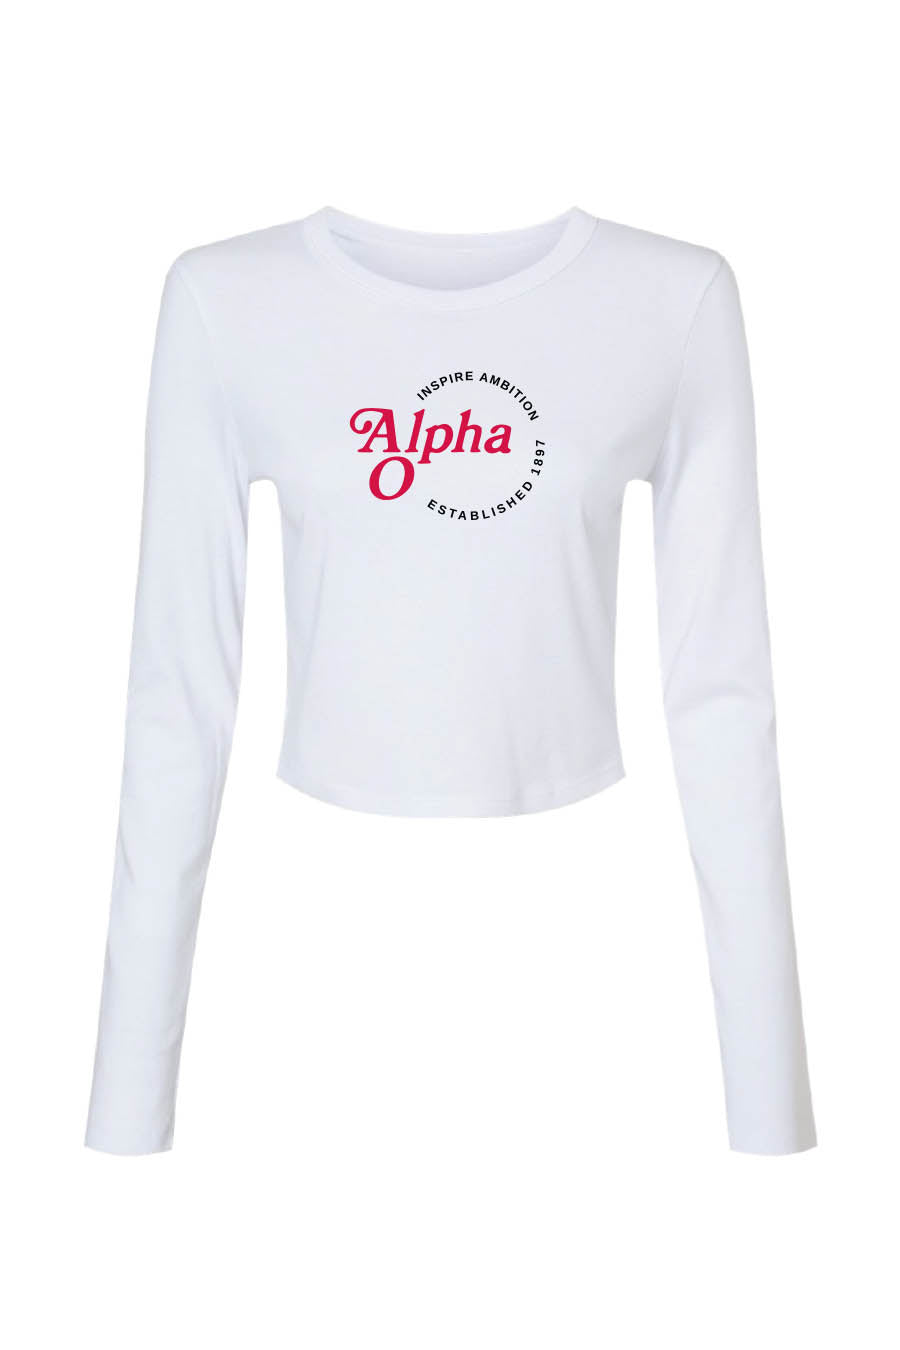 Alpha O Inspire Ambition Cropped Long Sleeve